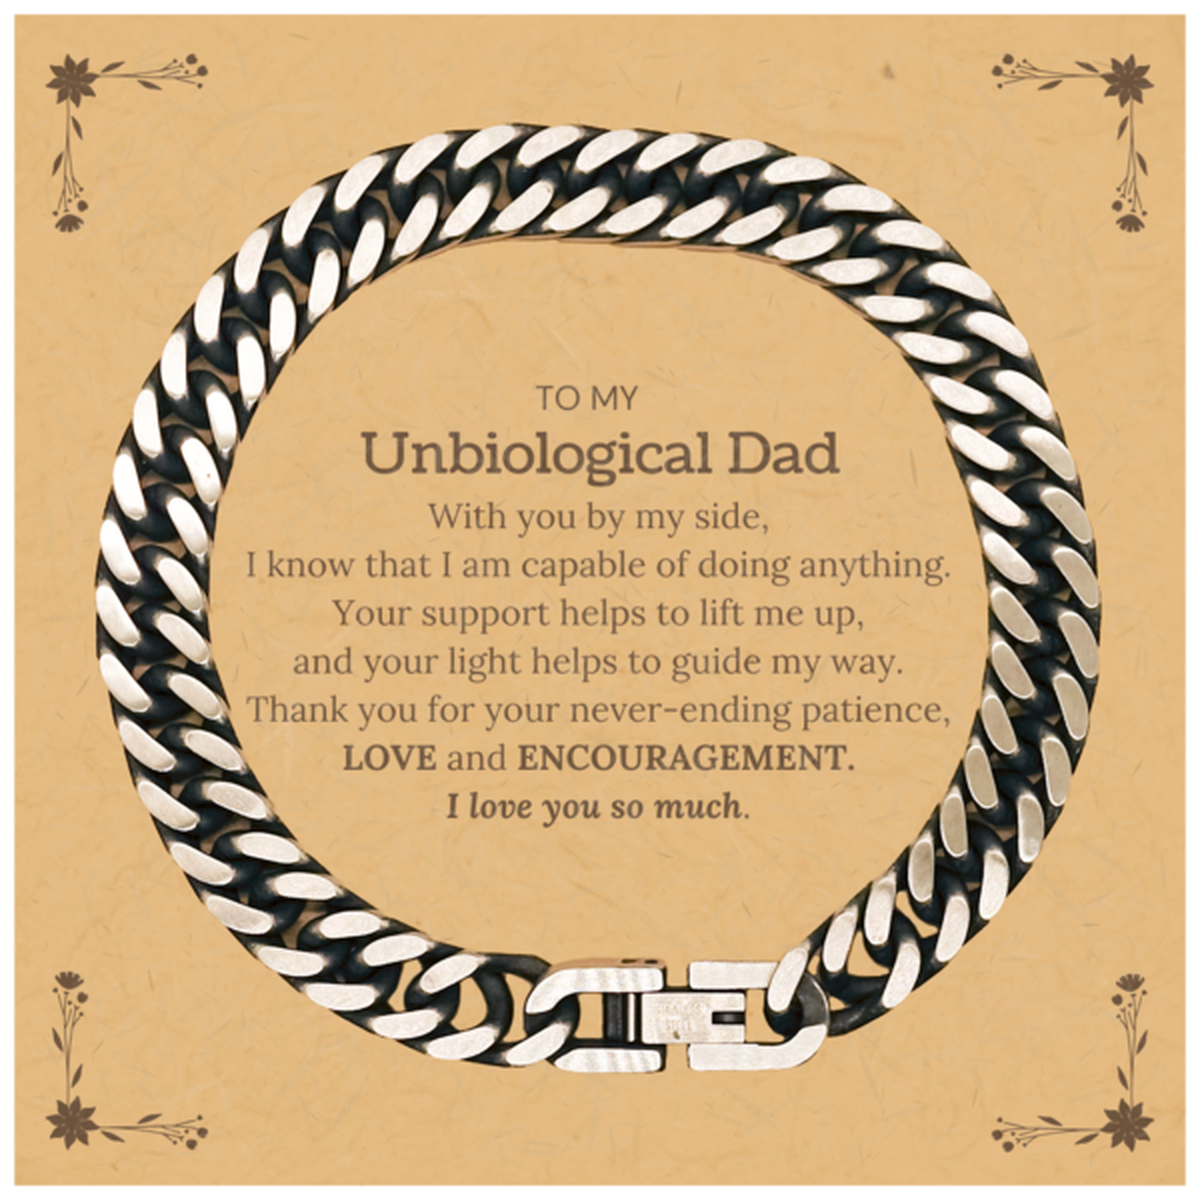 Appreciation Unbiological Dad Cuban Link Chain Bracelet Gifts, To My Unbiological Dad Birthday Christmas Wedding Keepsake Gifts for Unbiological Dad With you by my side, I know that I am capable of doing anything. I love you so much